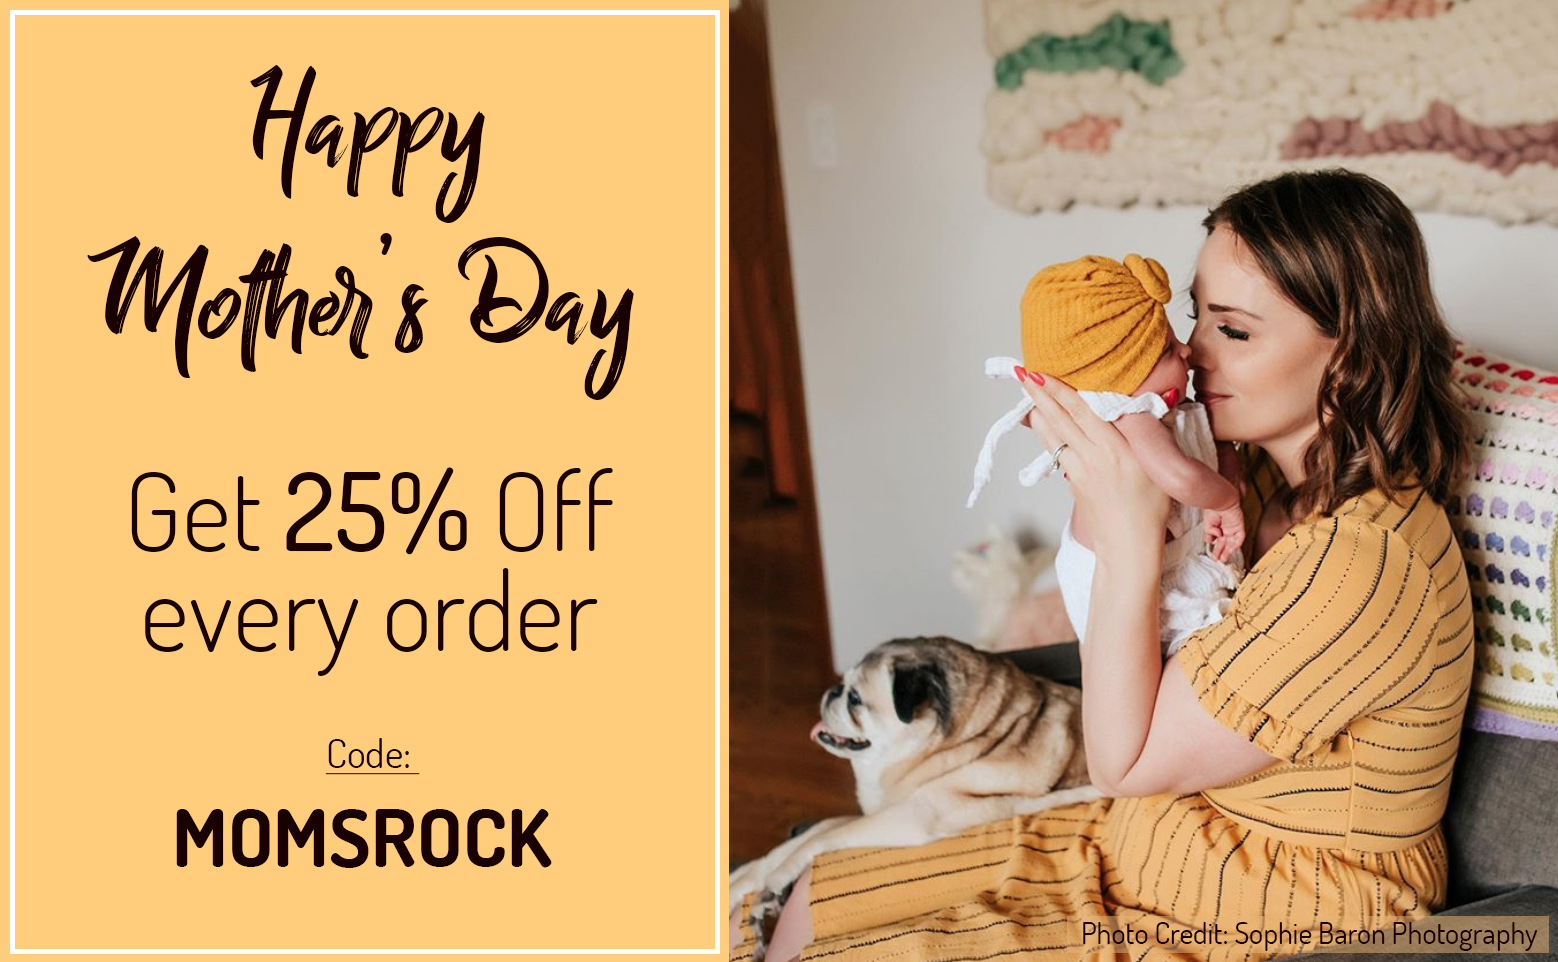 Hapry mafheb @@ Get 25% Off every order Code: MOMSROCK 